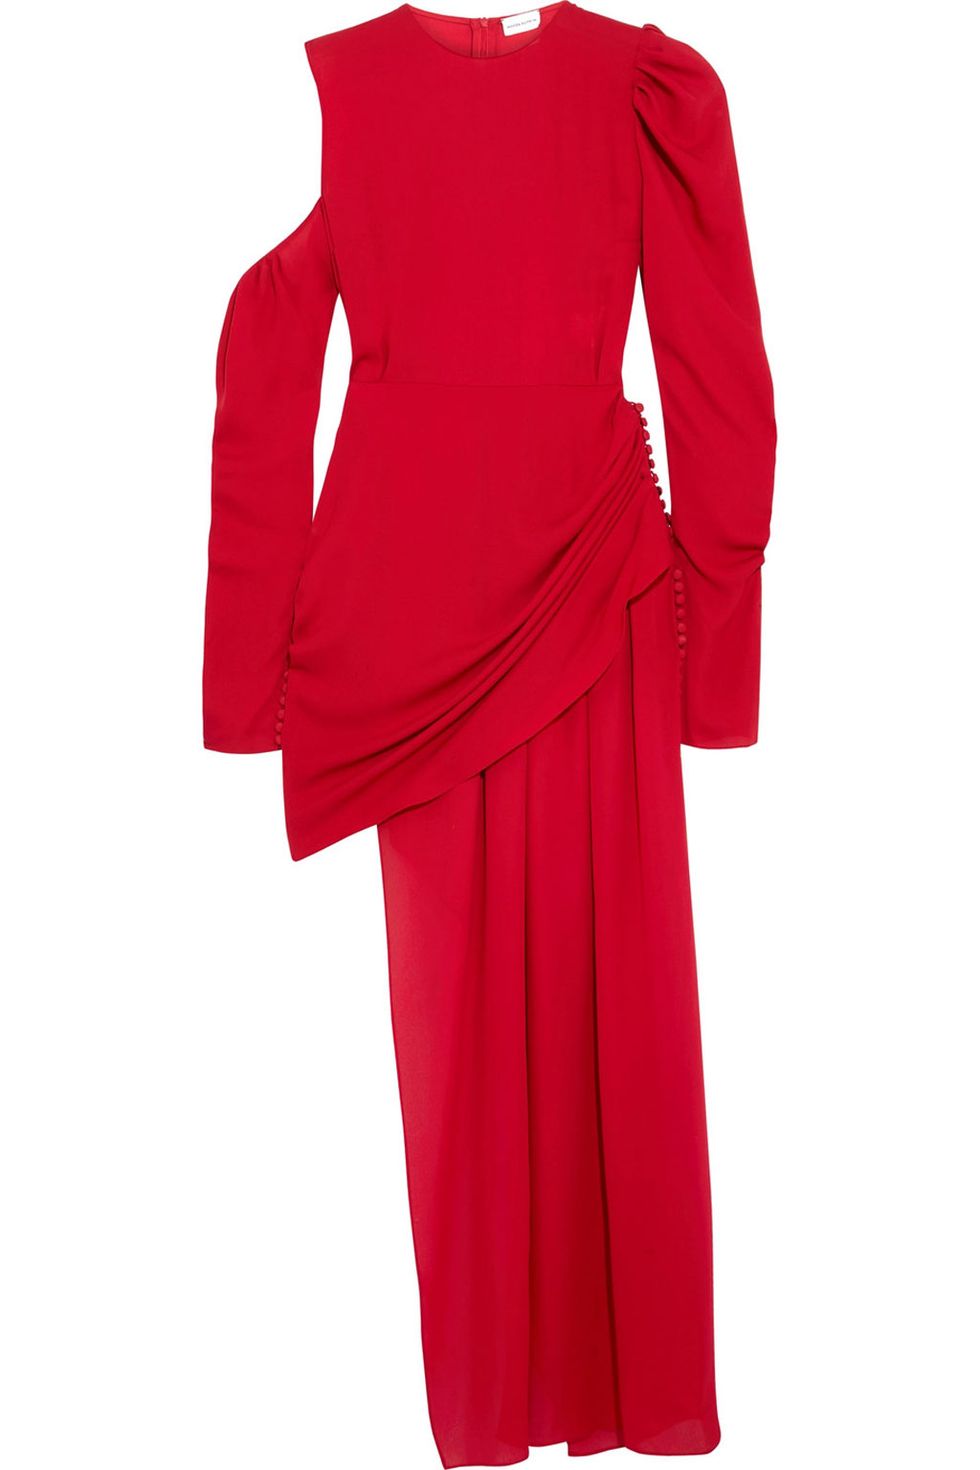 Clothing, Sleeve, Red, Dress, Neck, Outerwear, Shoulder, Formal wear, Suit, Day dress, 